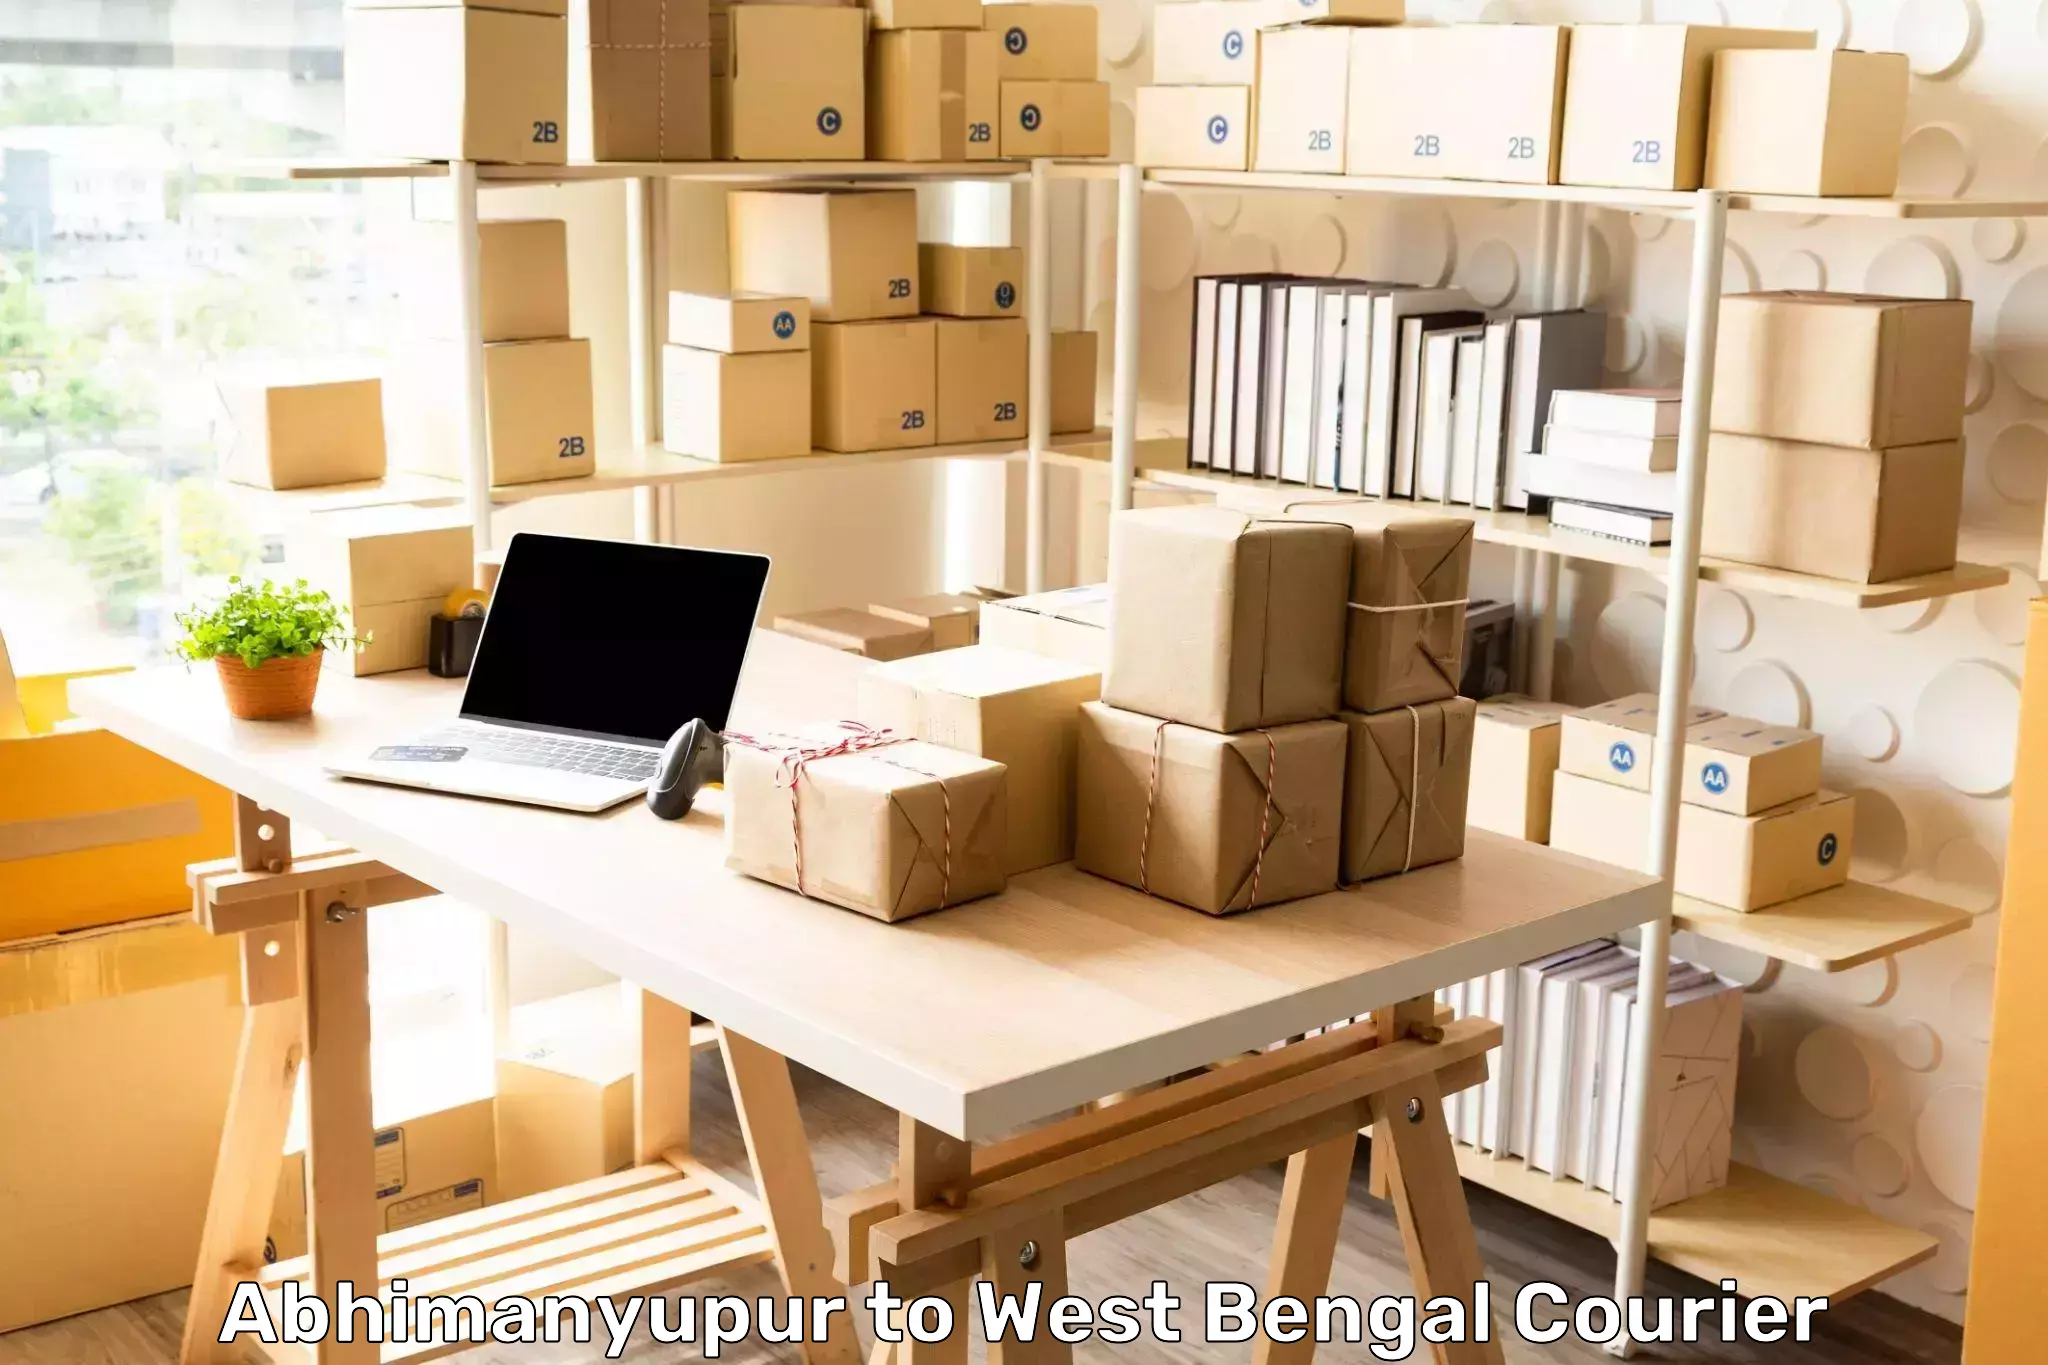 Innovative courier solutions Abhimanyupur to West Bengal